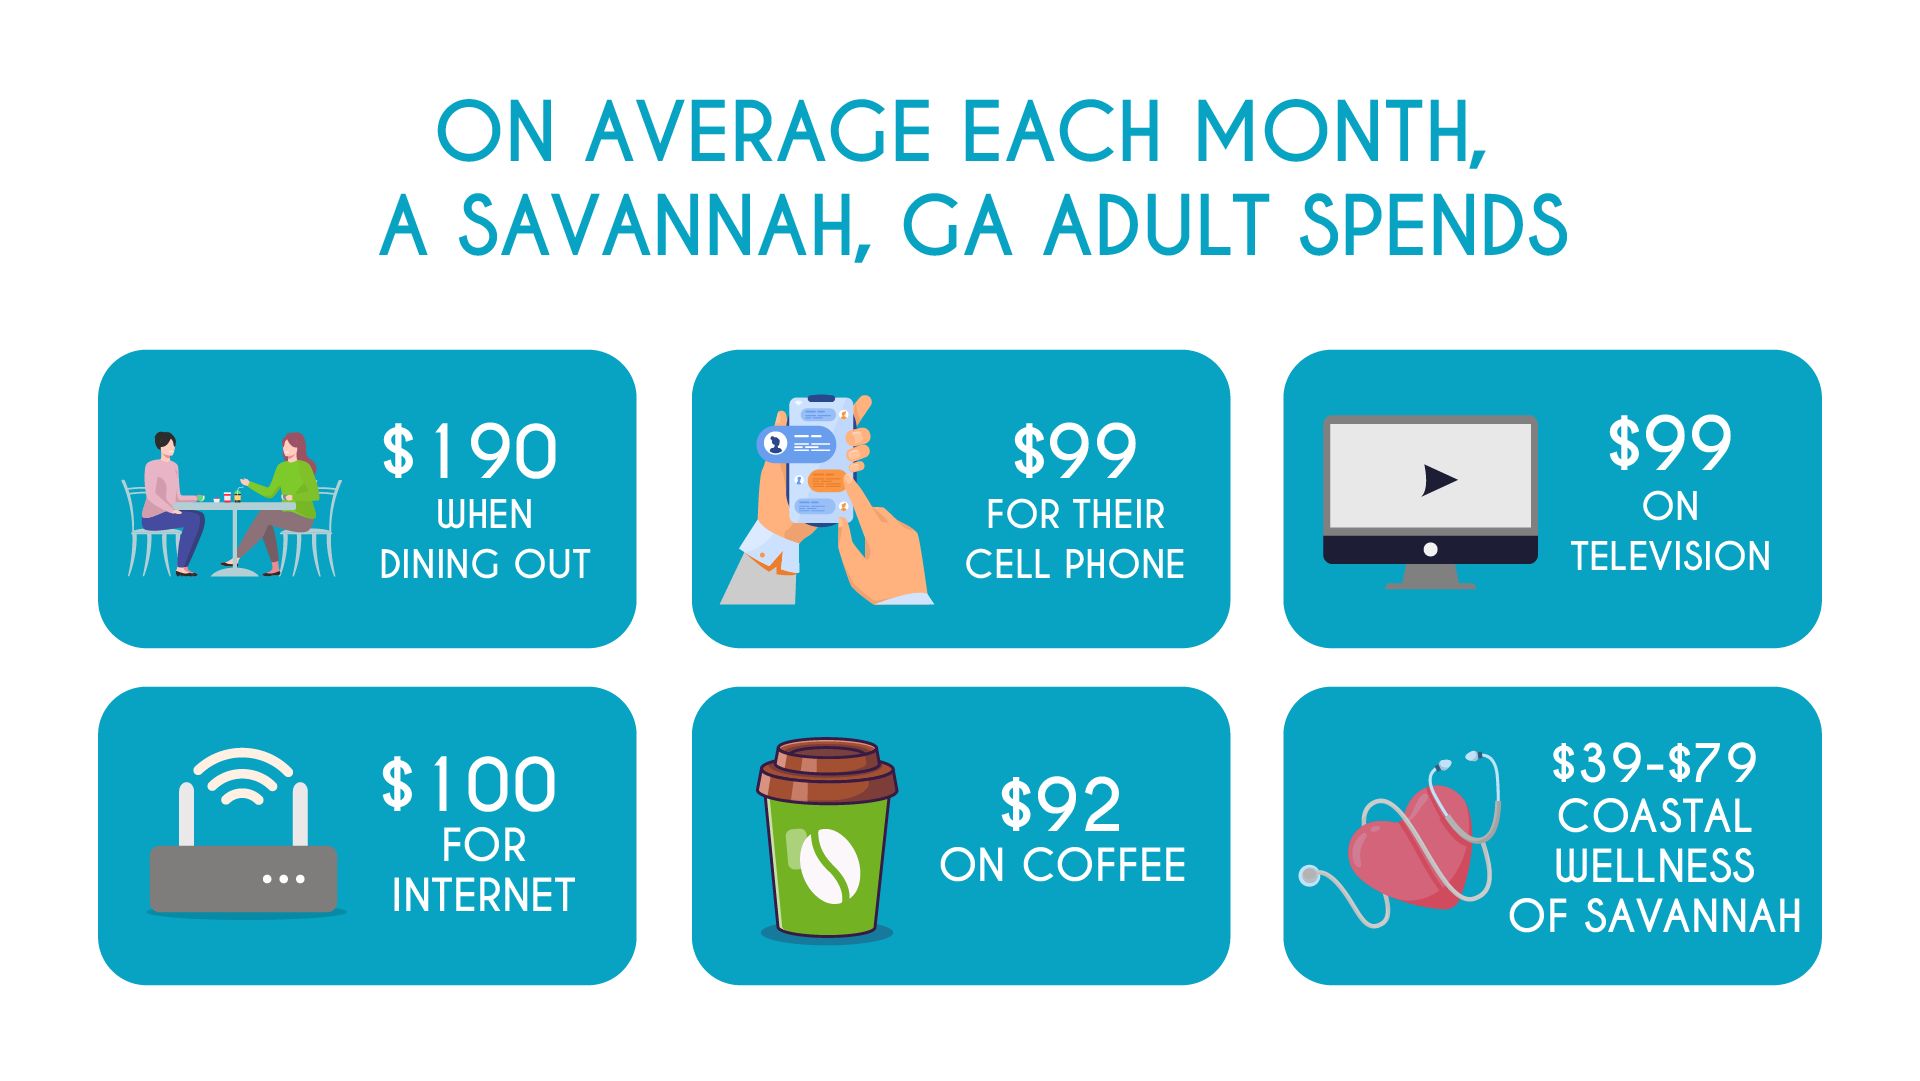 ON AVERAGE EACH MONTH. A SAVANNAH, GA ADULT SPENDS